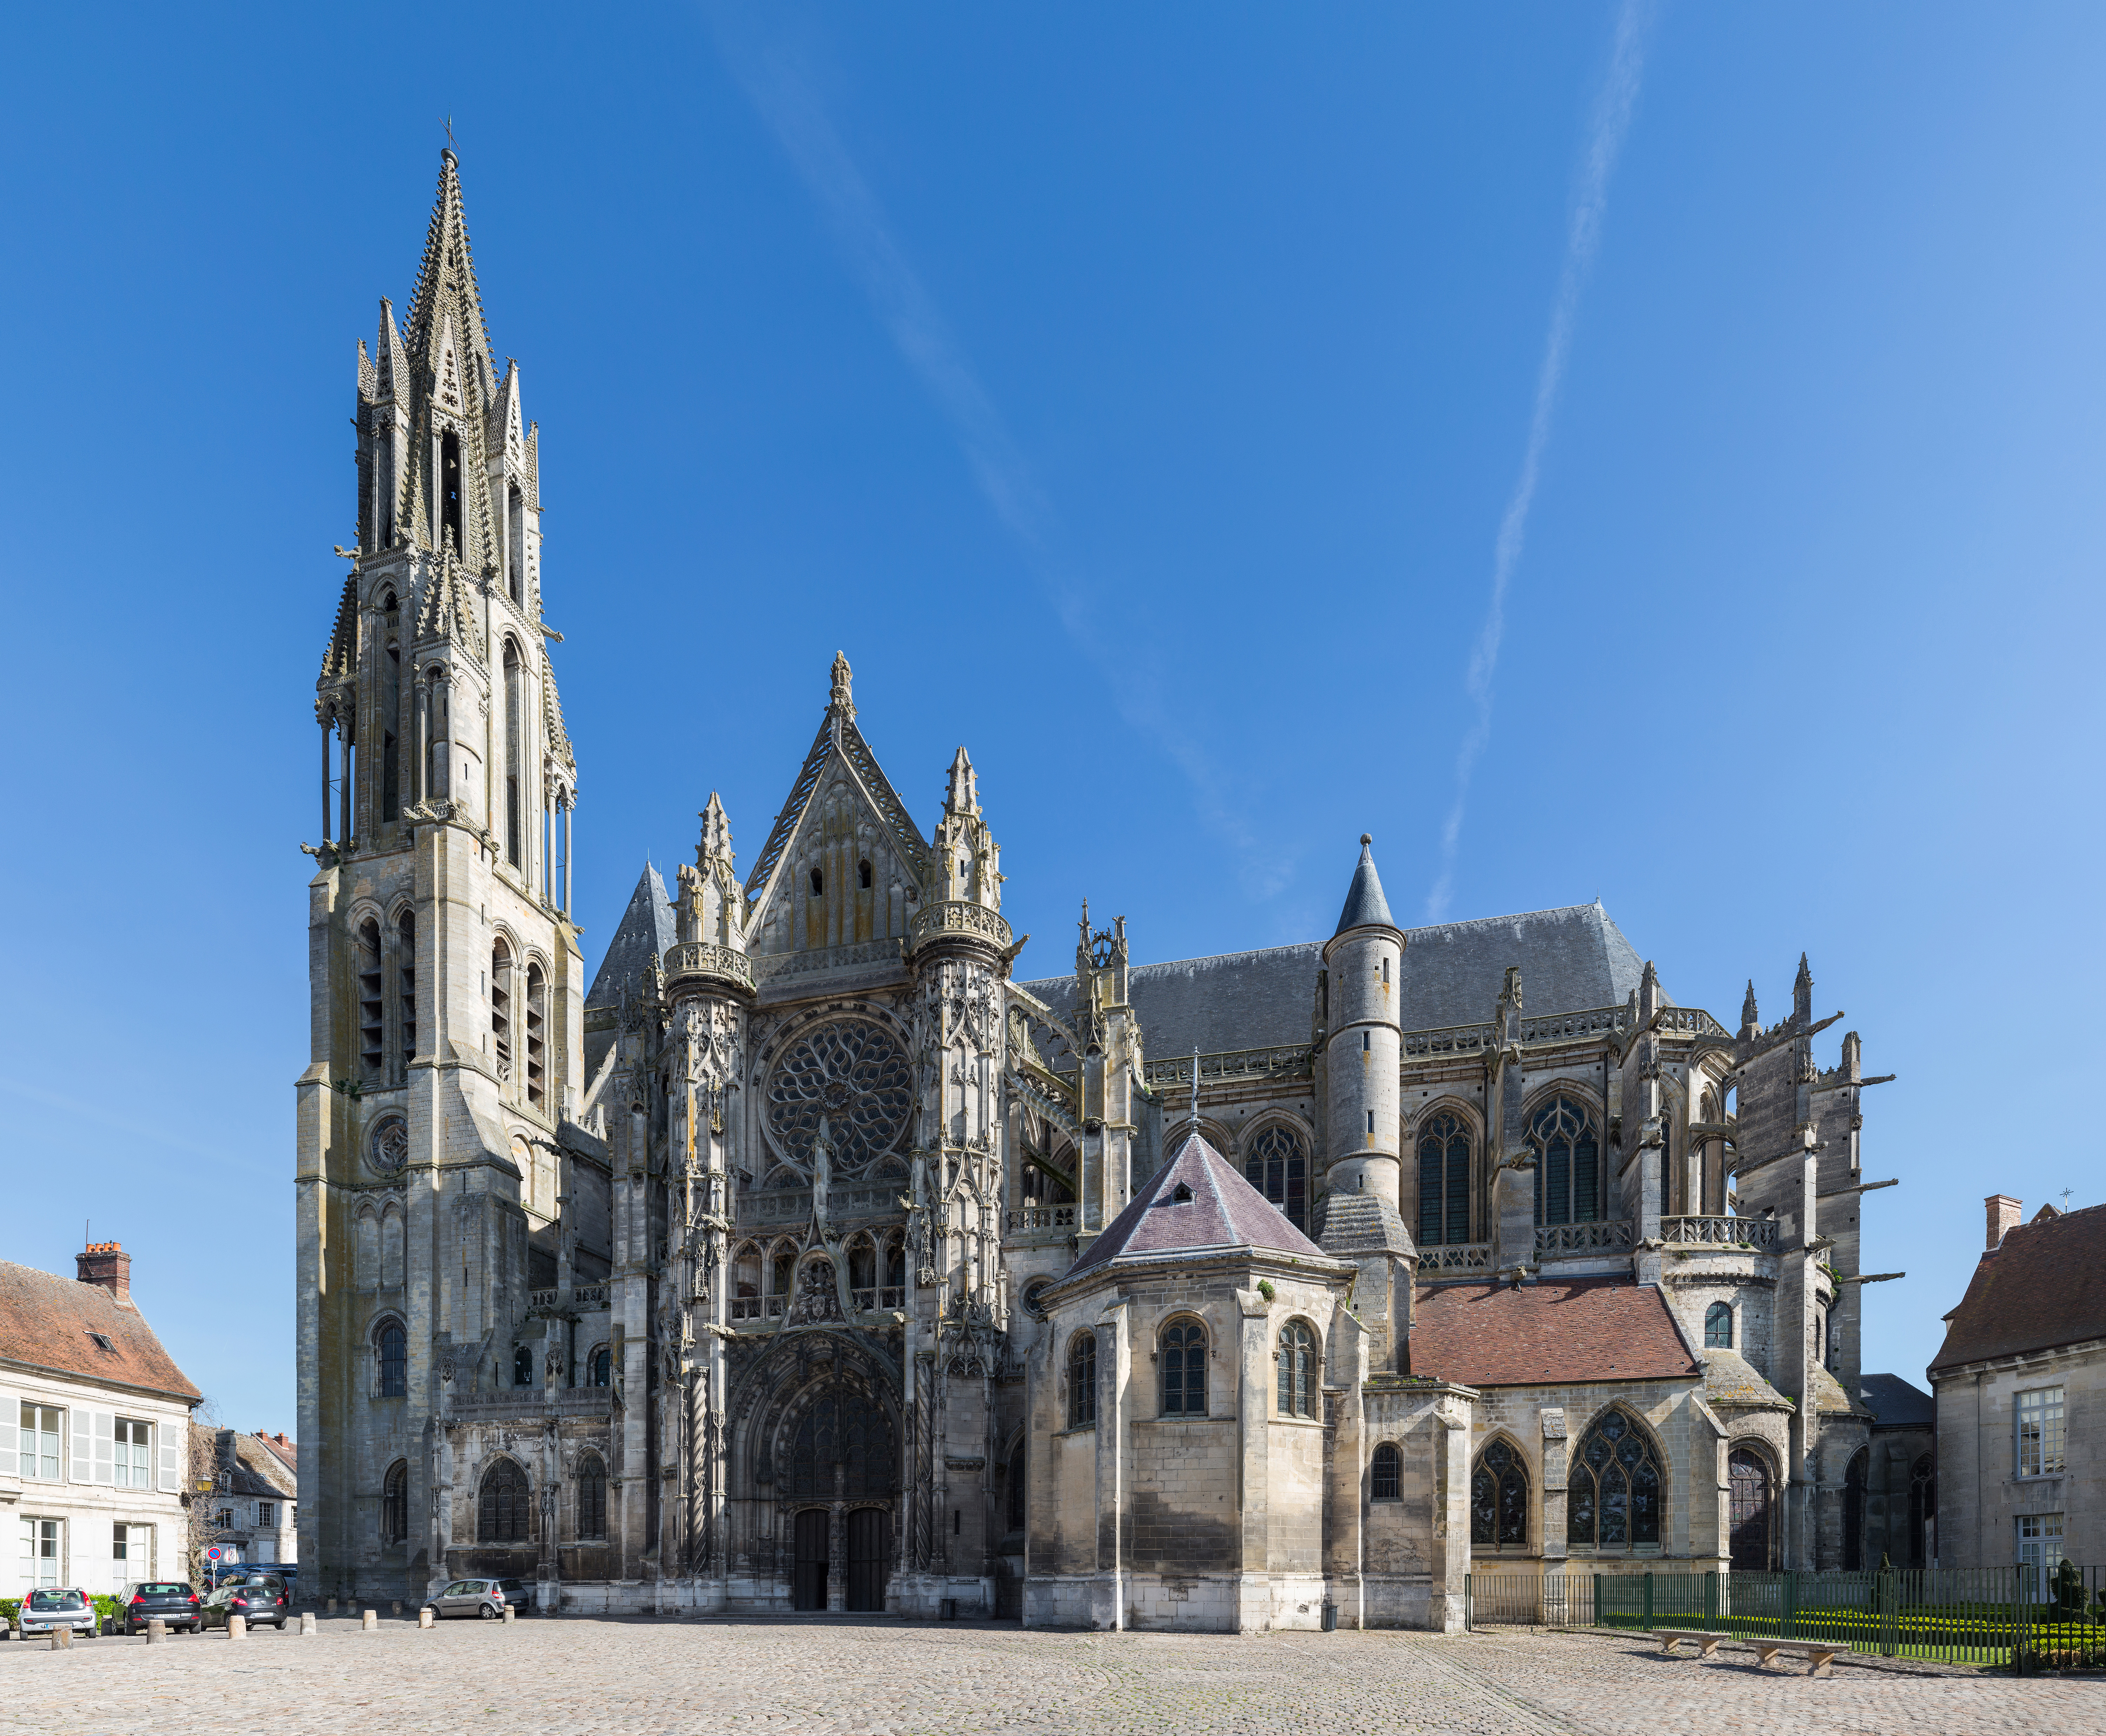 Senlis_Cathedral_Exterior%2C_Picardy%2C_France_-_Diliff.jpg